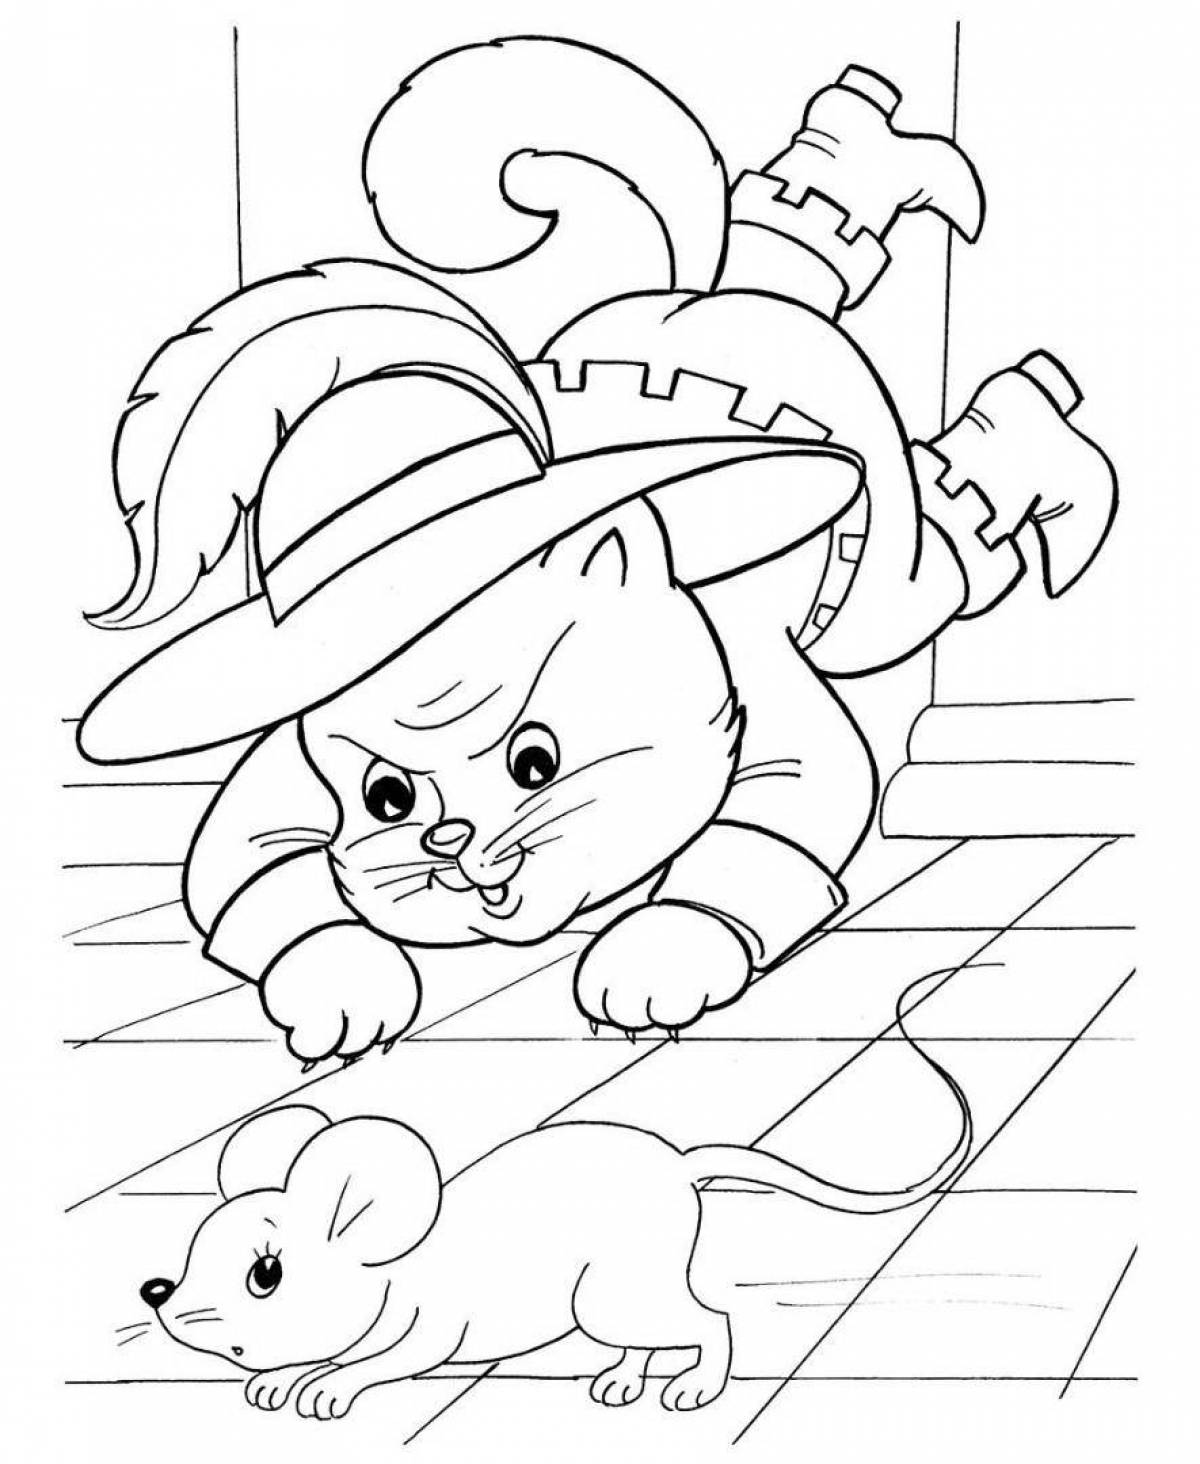 Animated puss in boots coloring book